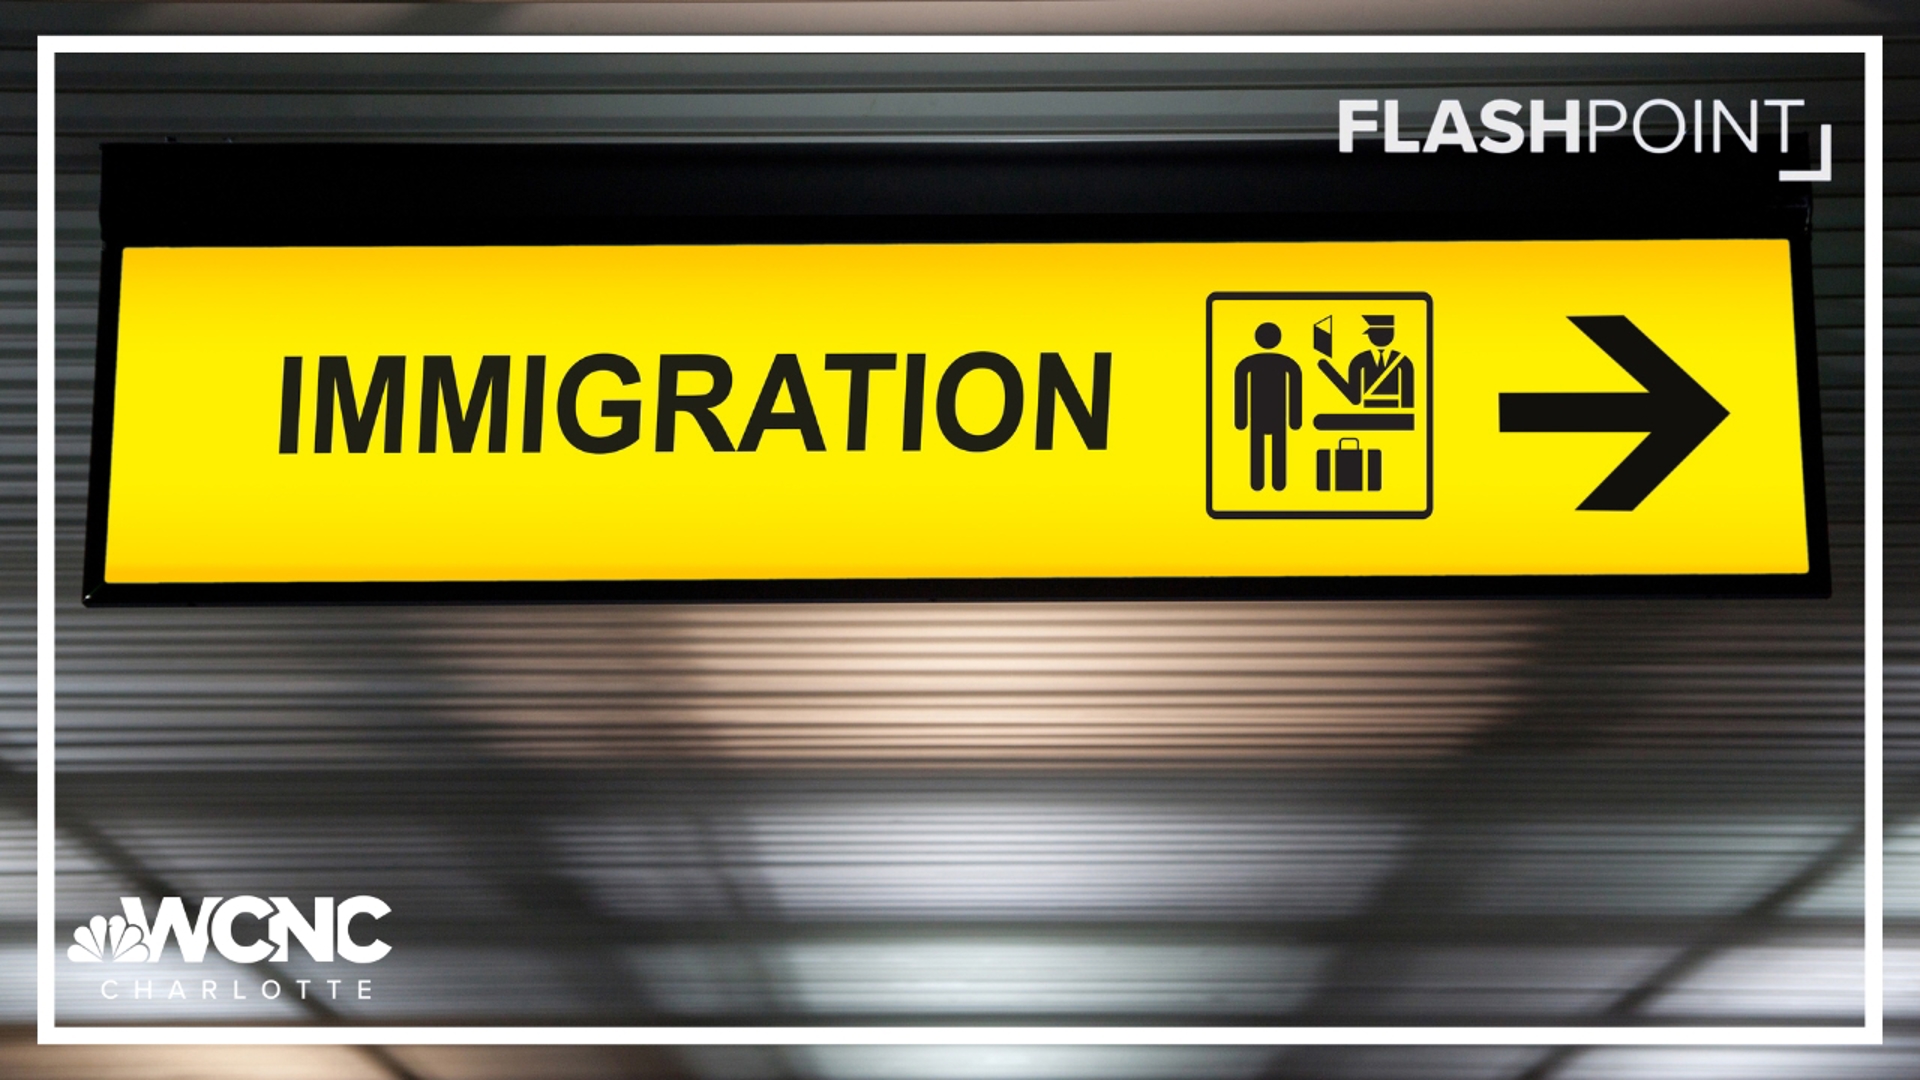 On Flashpoint, immigration advocates say they have concerns of racial profiling.